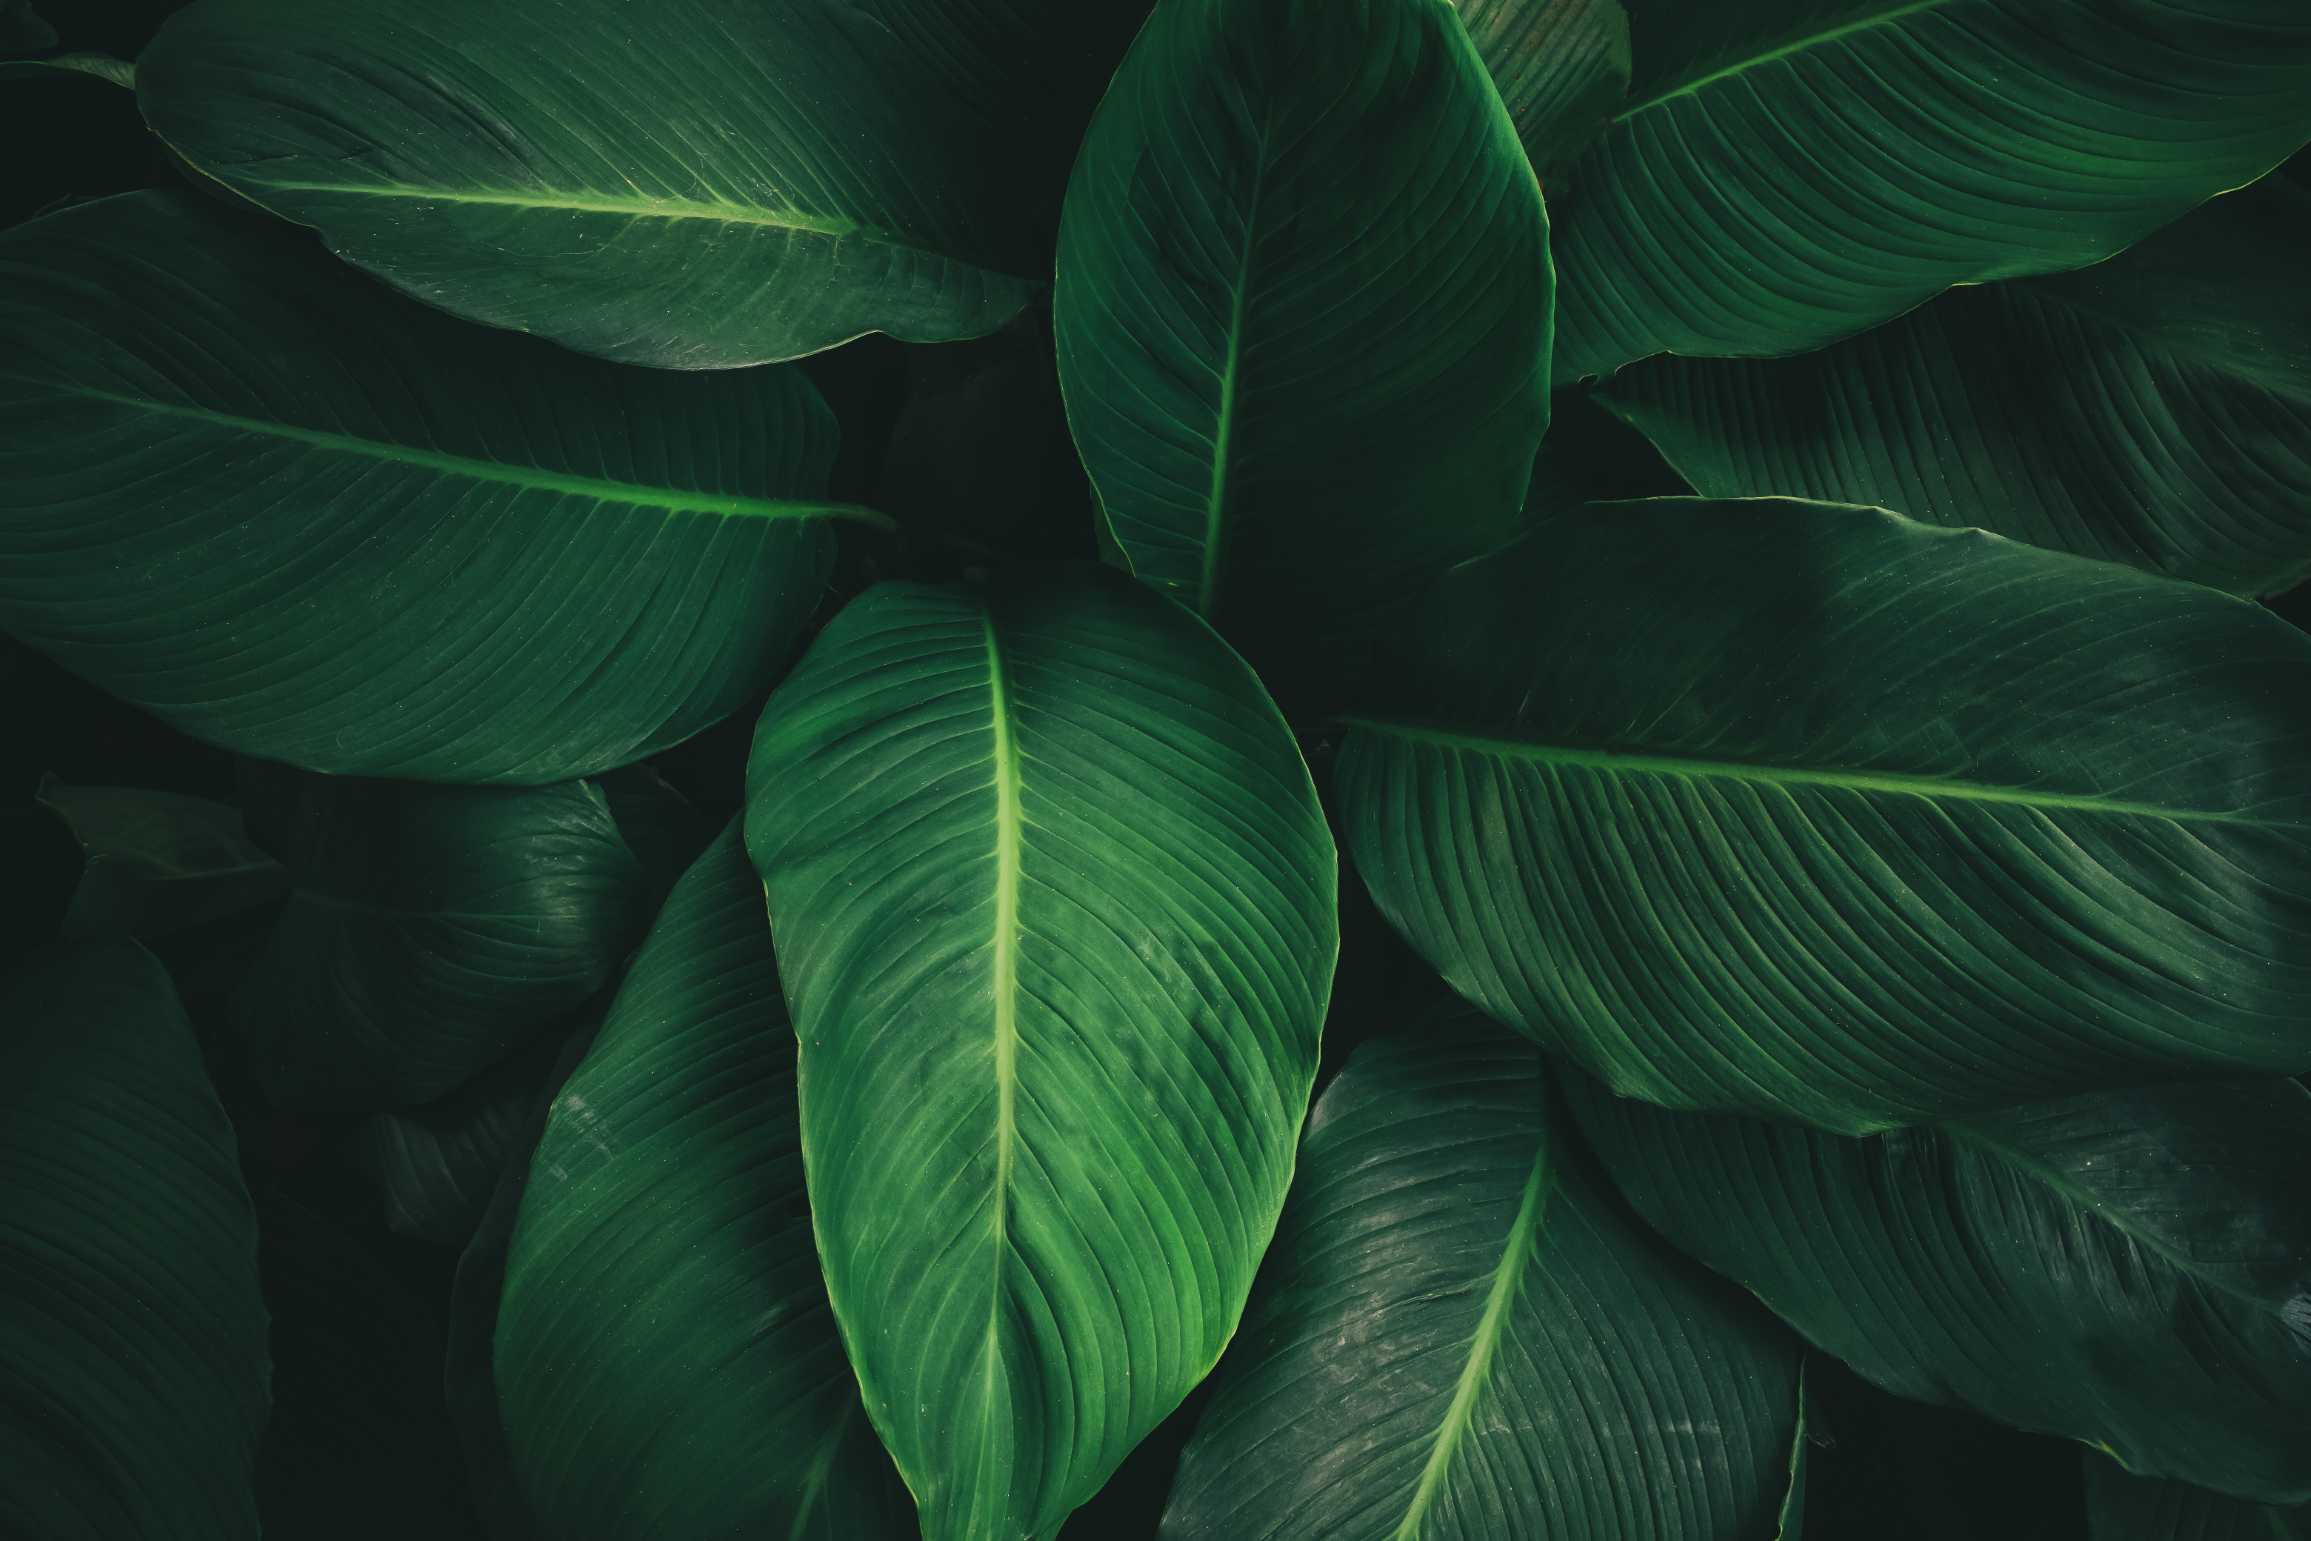 Plant Leaves Photography Print - ArtSmiley